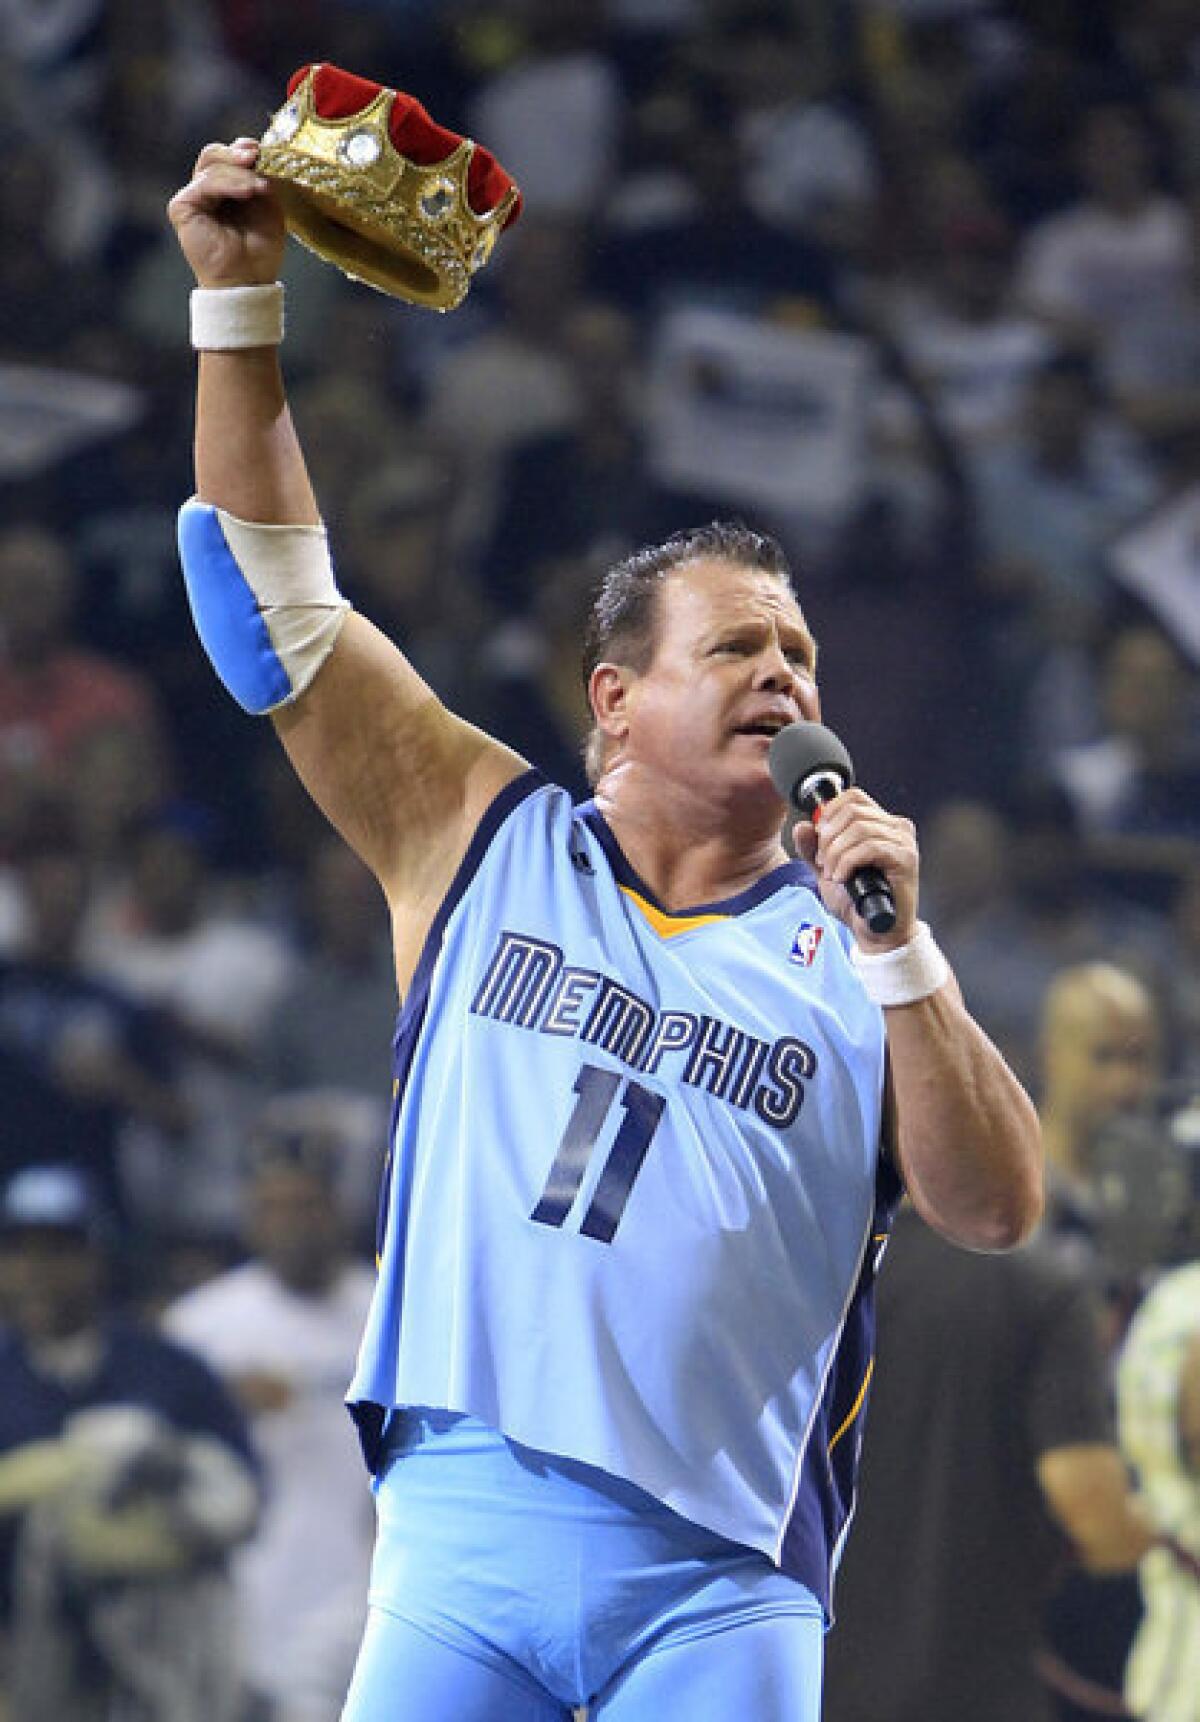 In an April 2011 file photo, Jerry Lawler gestures to fans before the start of Game 3 of a first-round NBA playoff series game between the San Antonio Spurs and the Grizzlies in Memphis, Tenn.